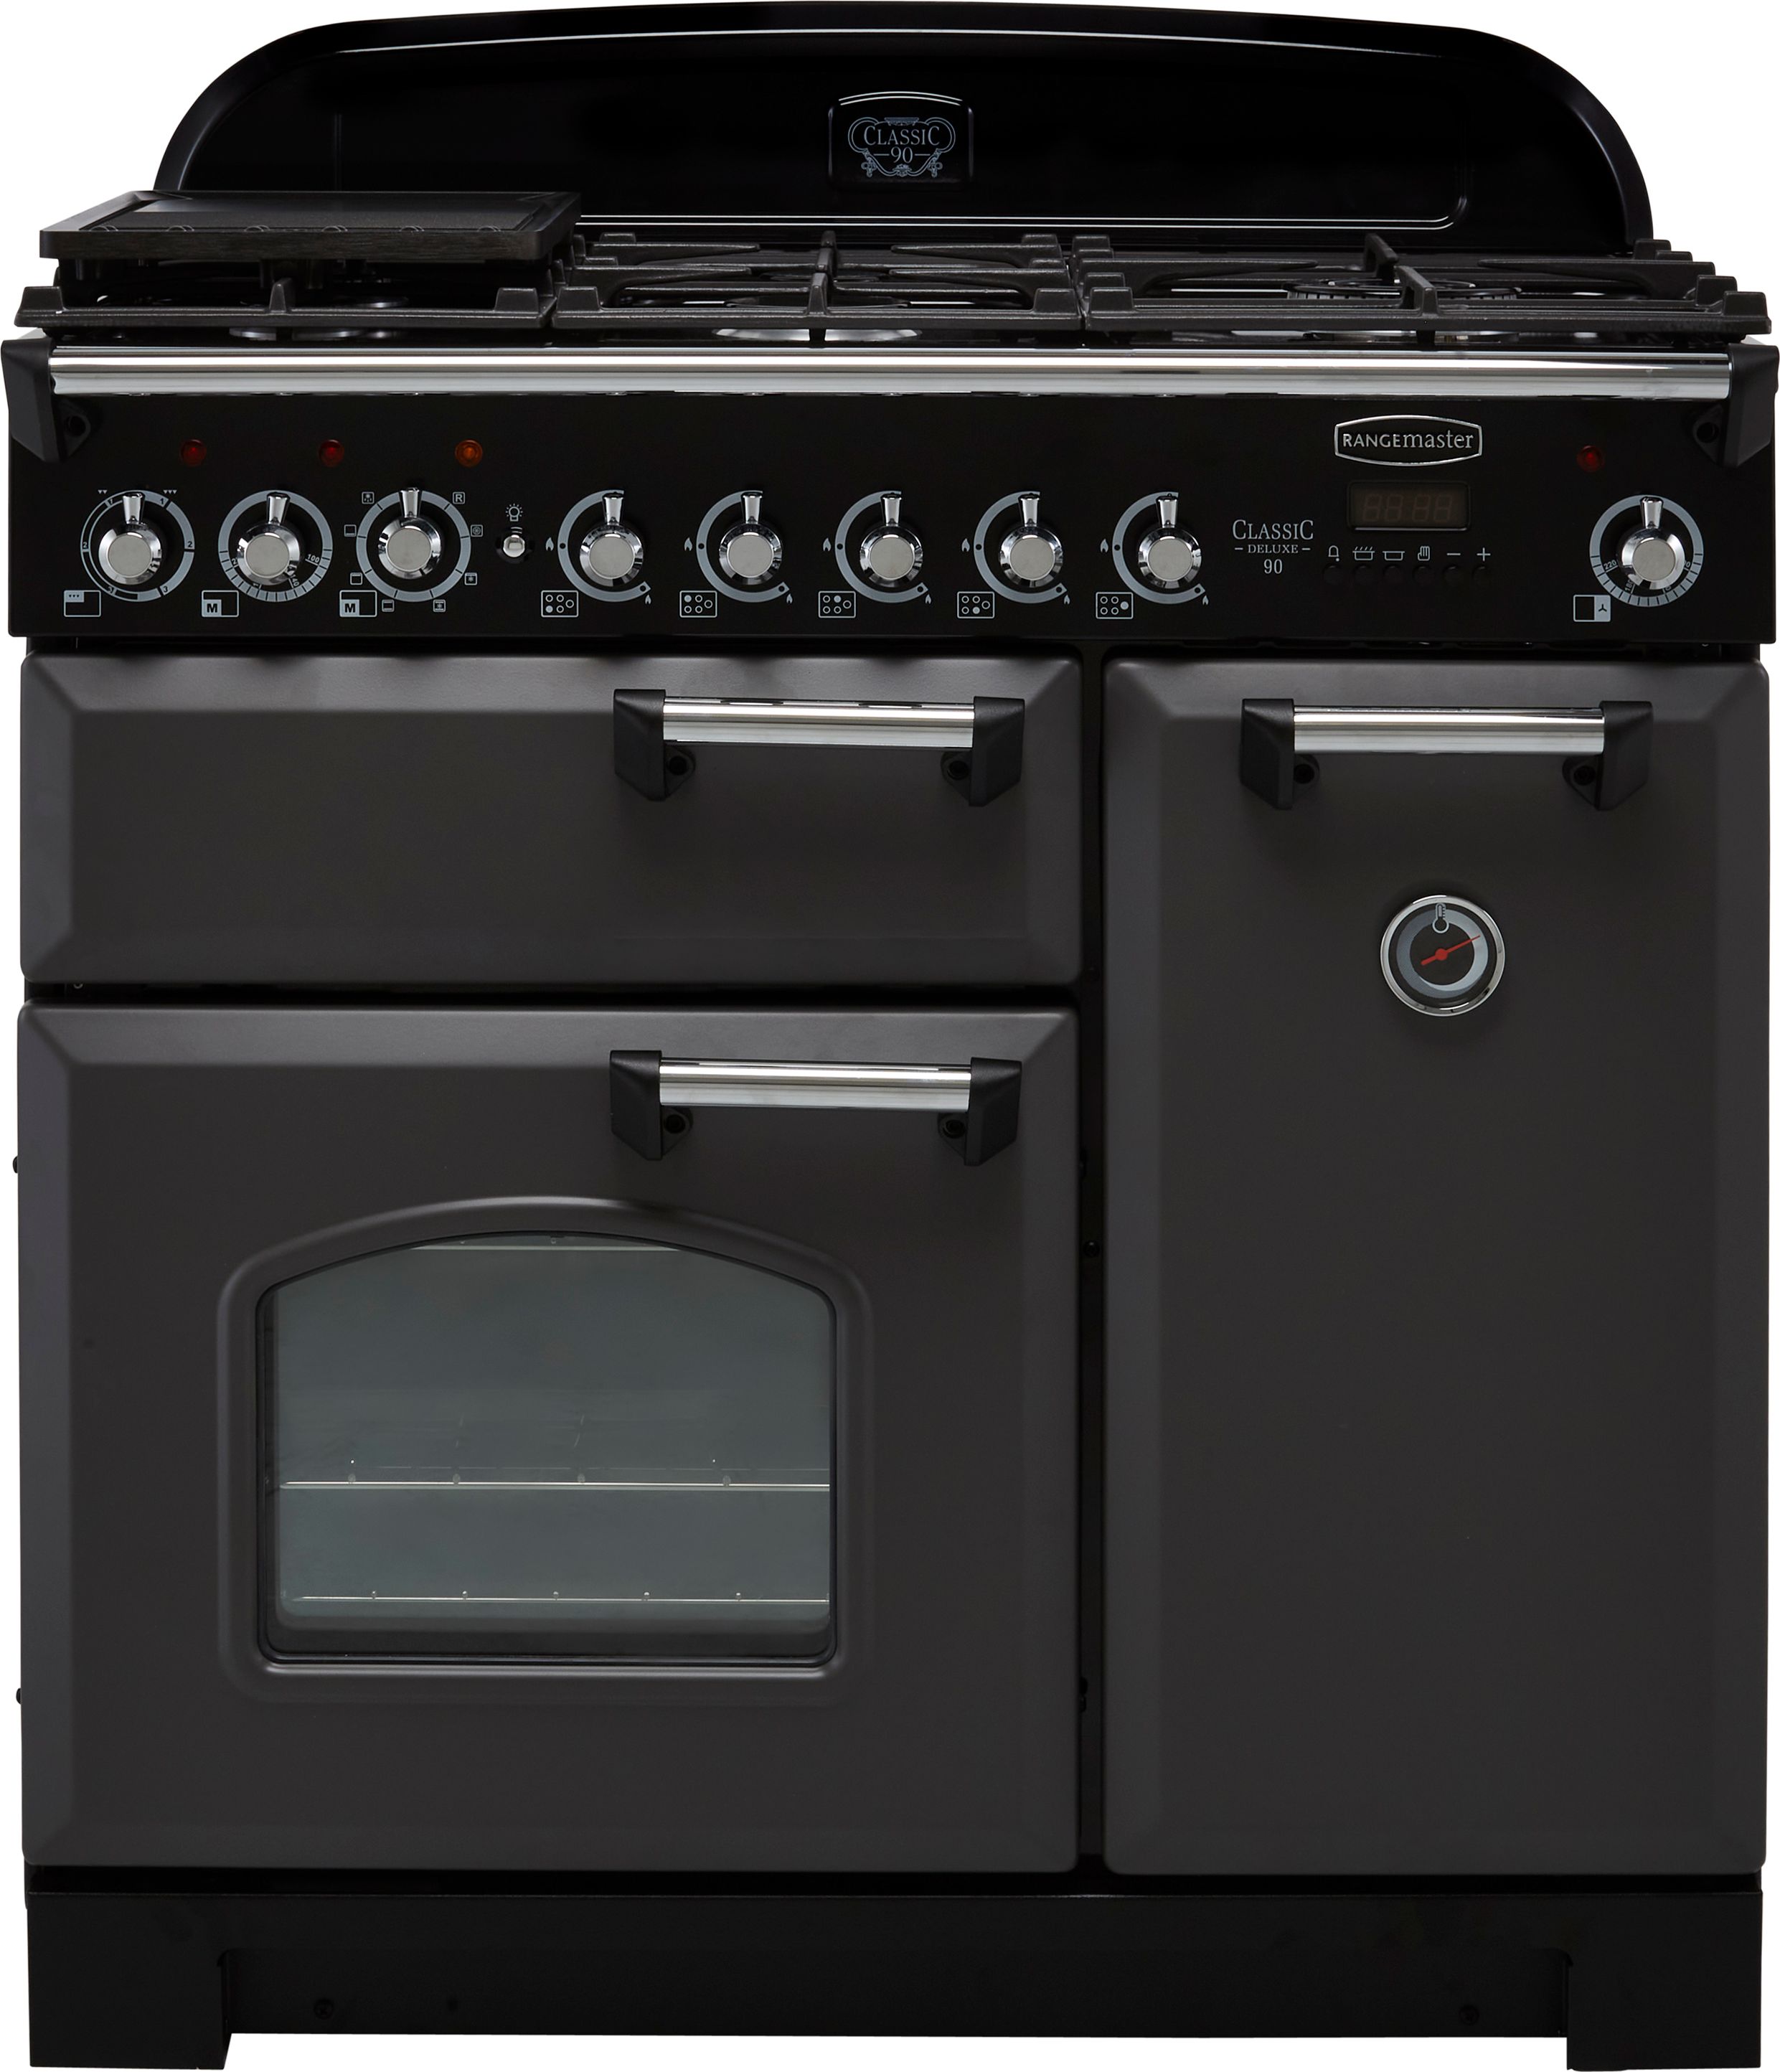 Rangemaster Classic Deluxe CDL90DFFSL/C 90cm Dual Fuel Range Cooker - Slate Grey / Chrome - A/A Rated, Grey